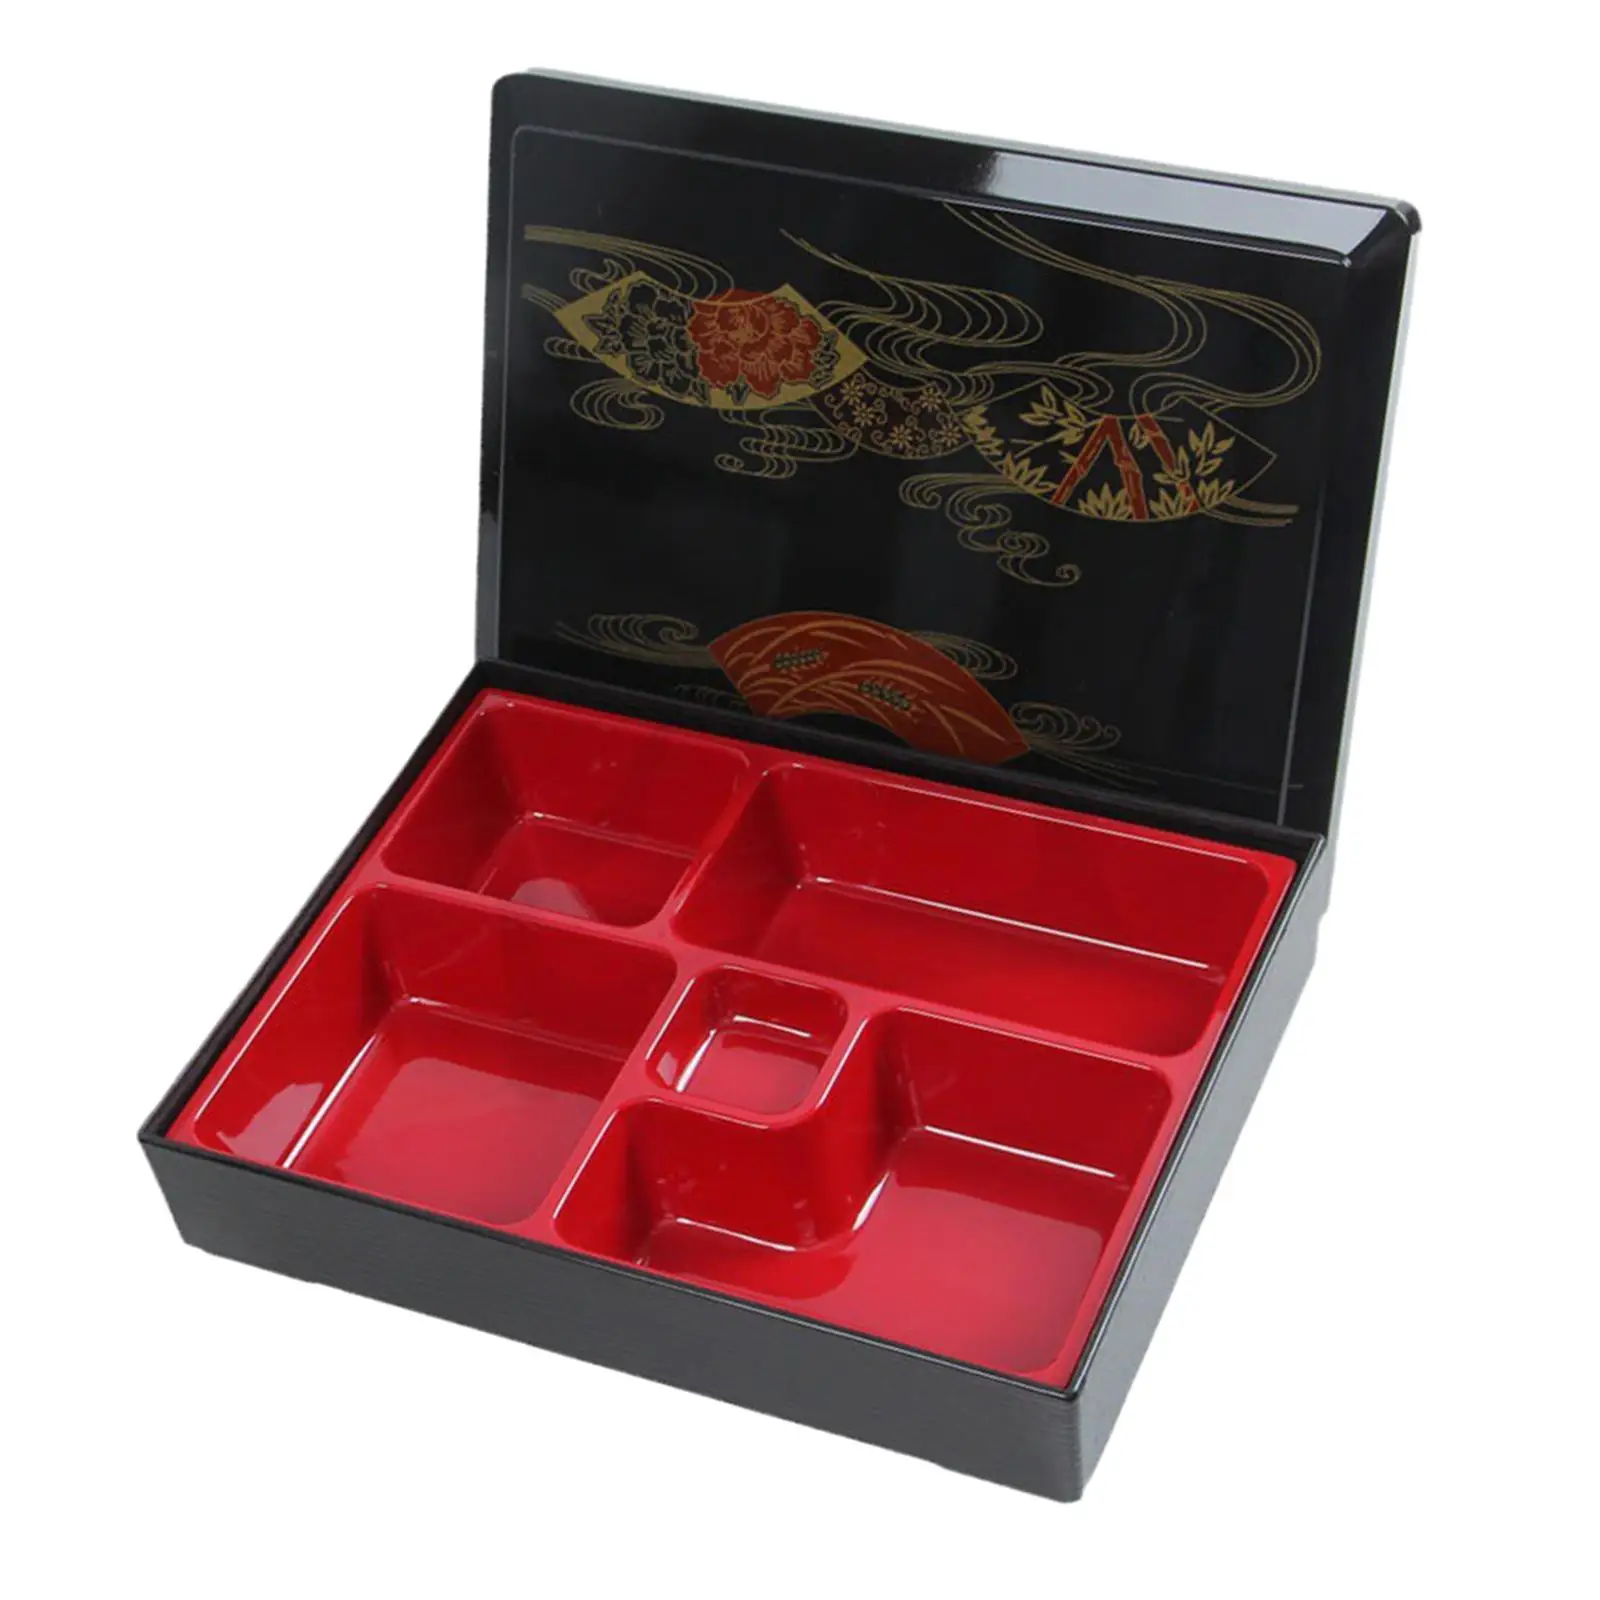 Japanese Bento Box Red and Black Serving Dish for Picnic Office Business